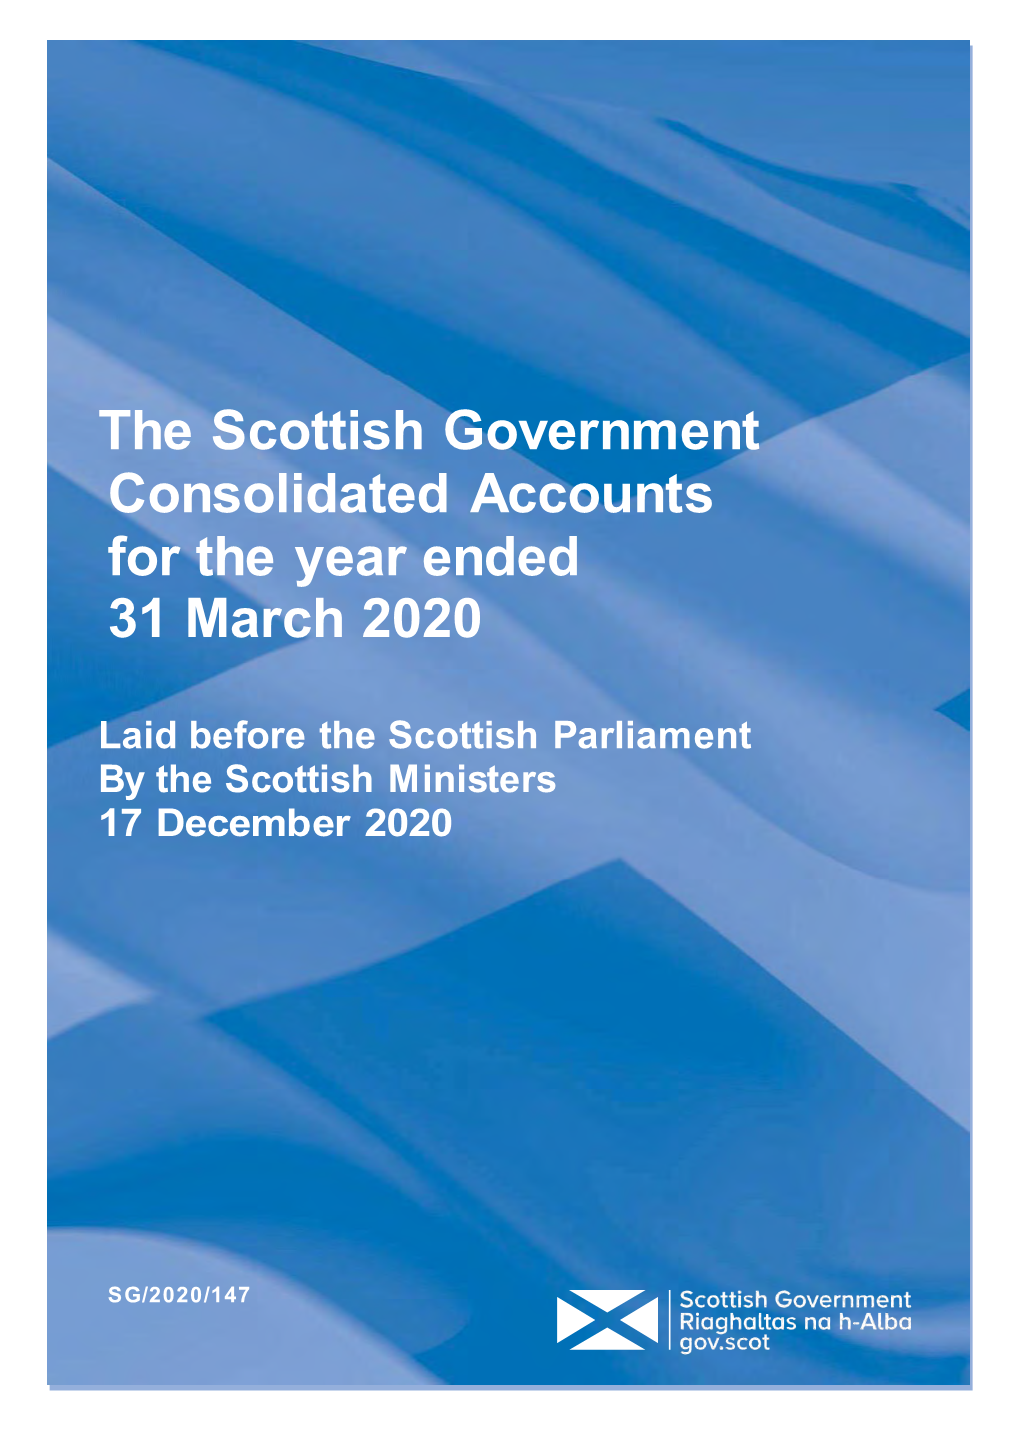 The Scottish Government Consolidated Accounts for the Year Ended 31 March 2020